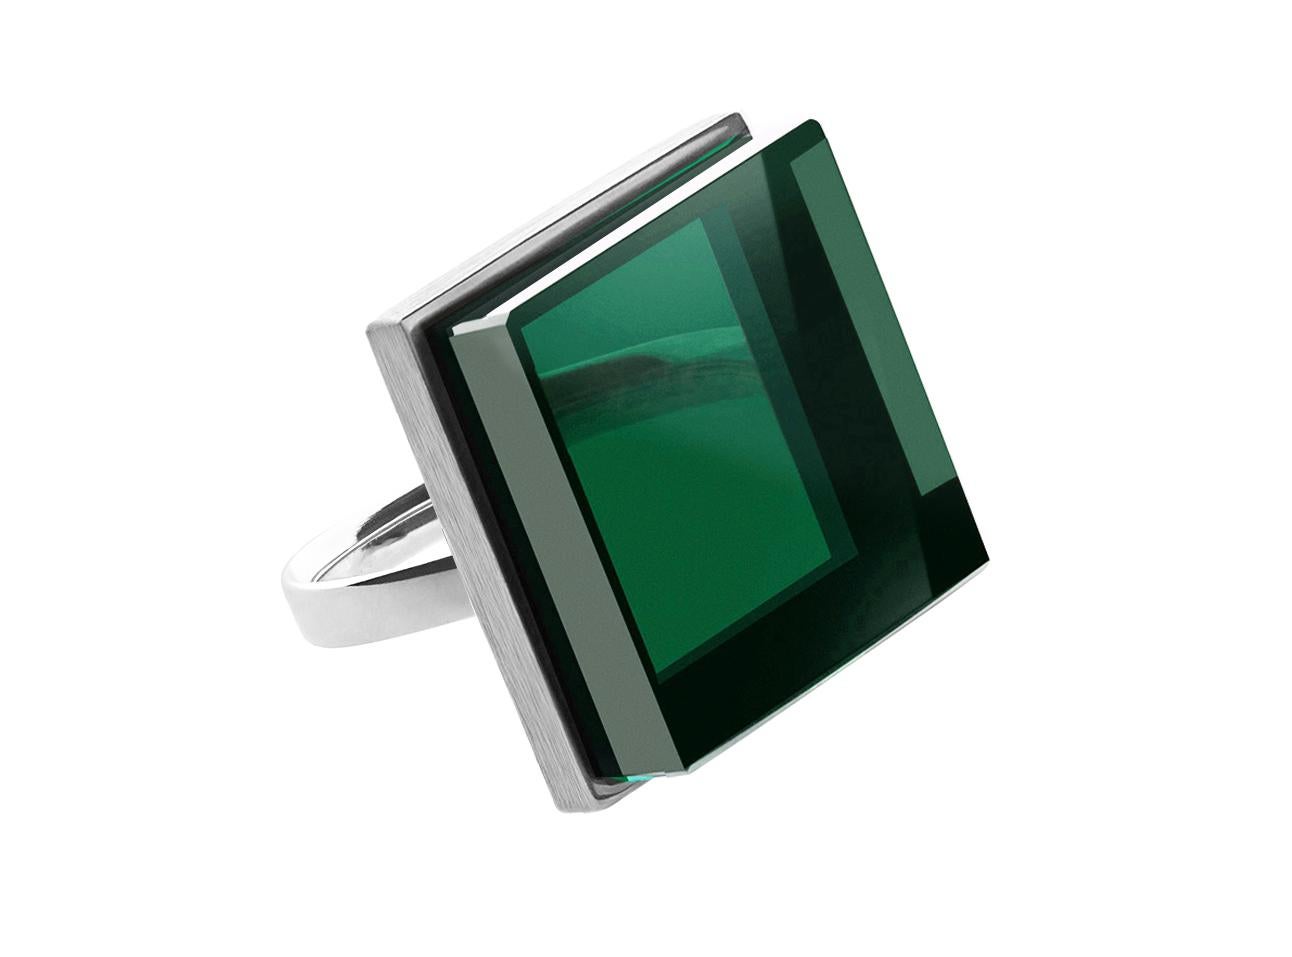 This contemporary fashion ring features a 20x20x6 mm green grown quartz set in 18 karat white gold. It has been featured in Harper's Bazaar and Vogue UA. This piece can be personally signed.

The ring has an art deco feel and is suitable for both